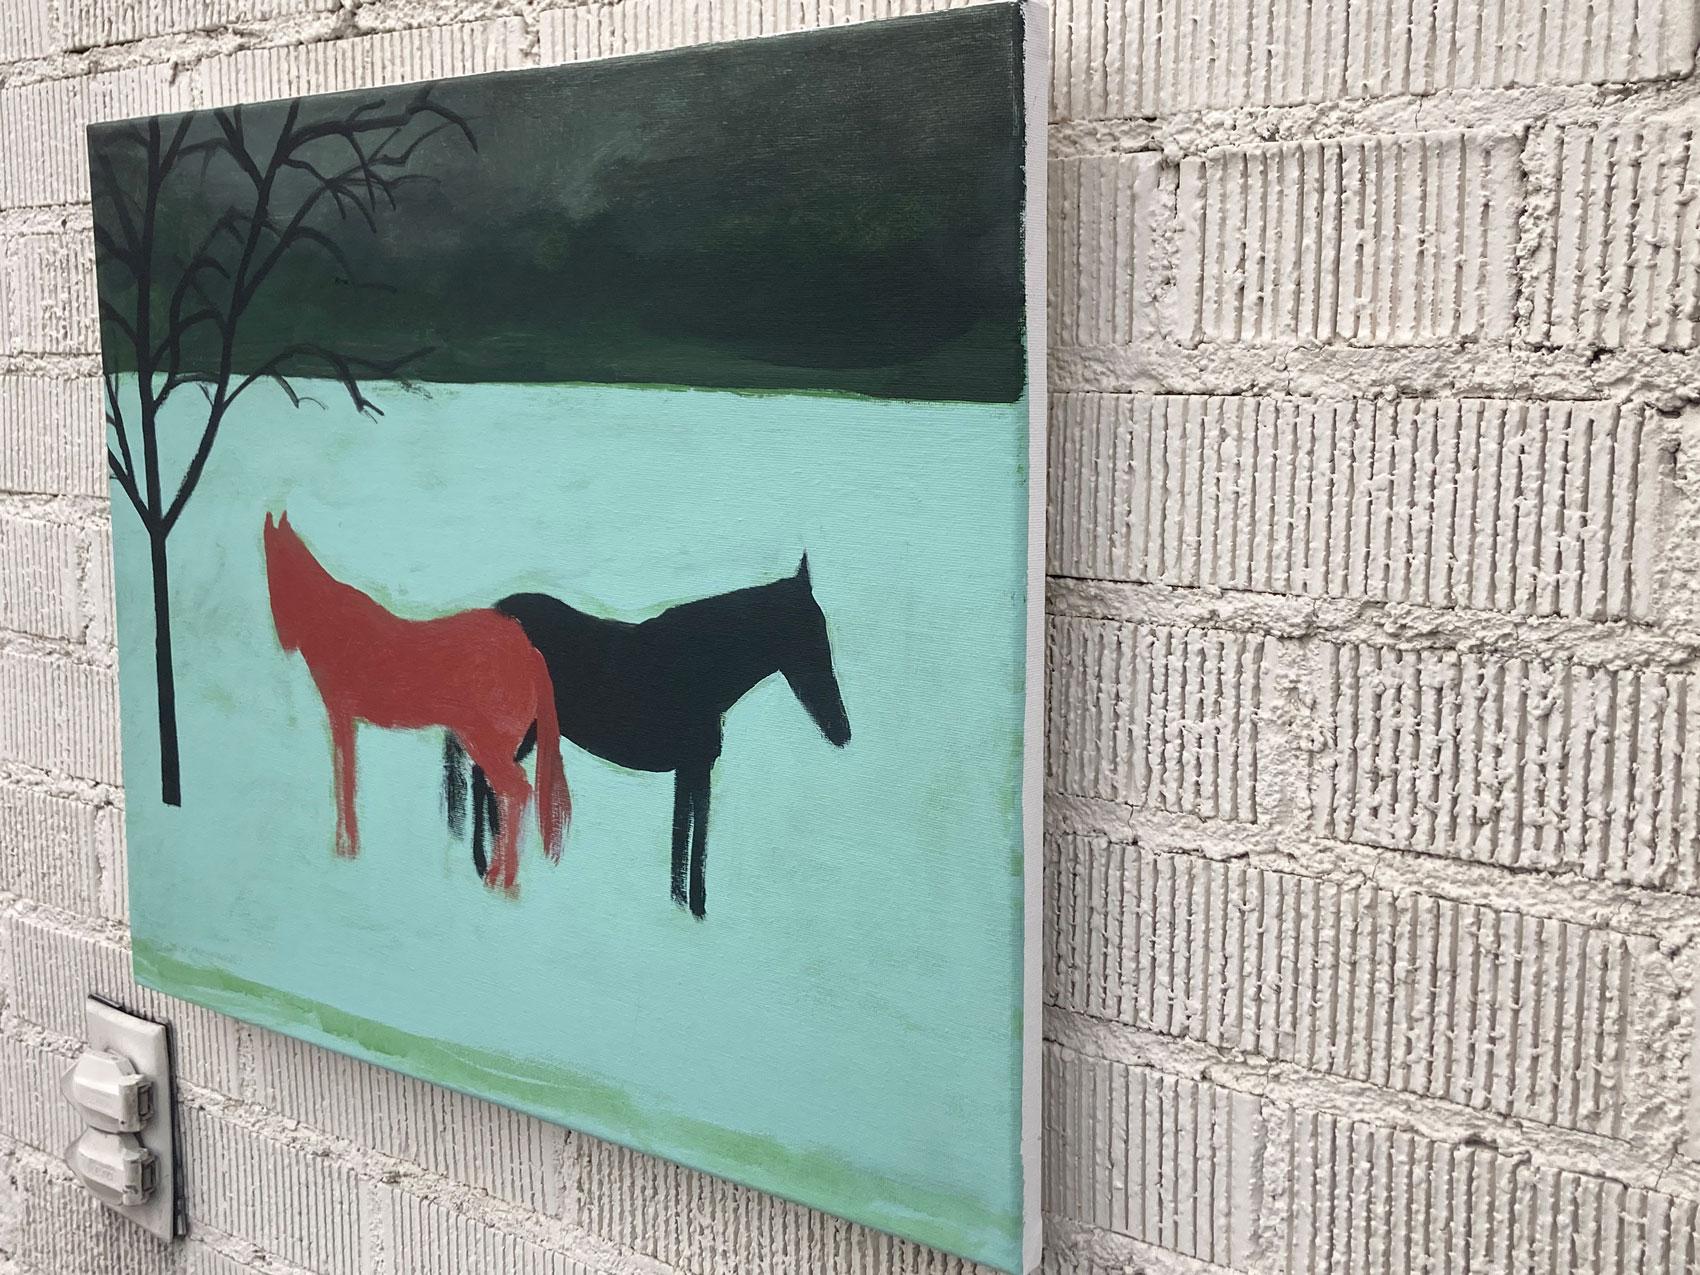 <p>Artist Comments<br>Artist Nick Bontorno displays two horses facing away from each other. Their contrasting black and red coats allow both subjects to stand out against the pale landscape. Nick charmingly employs the fundamentals of primitivism